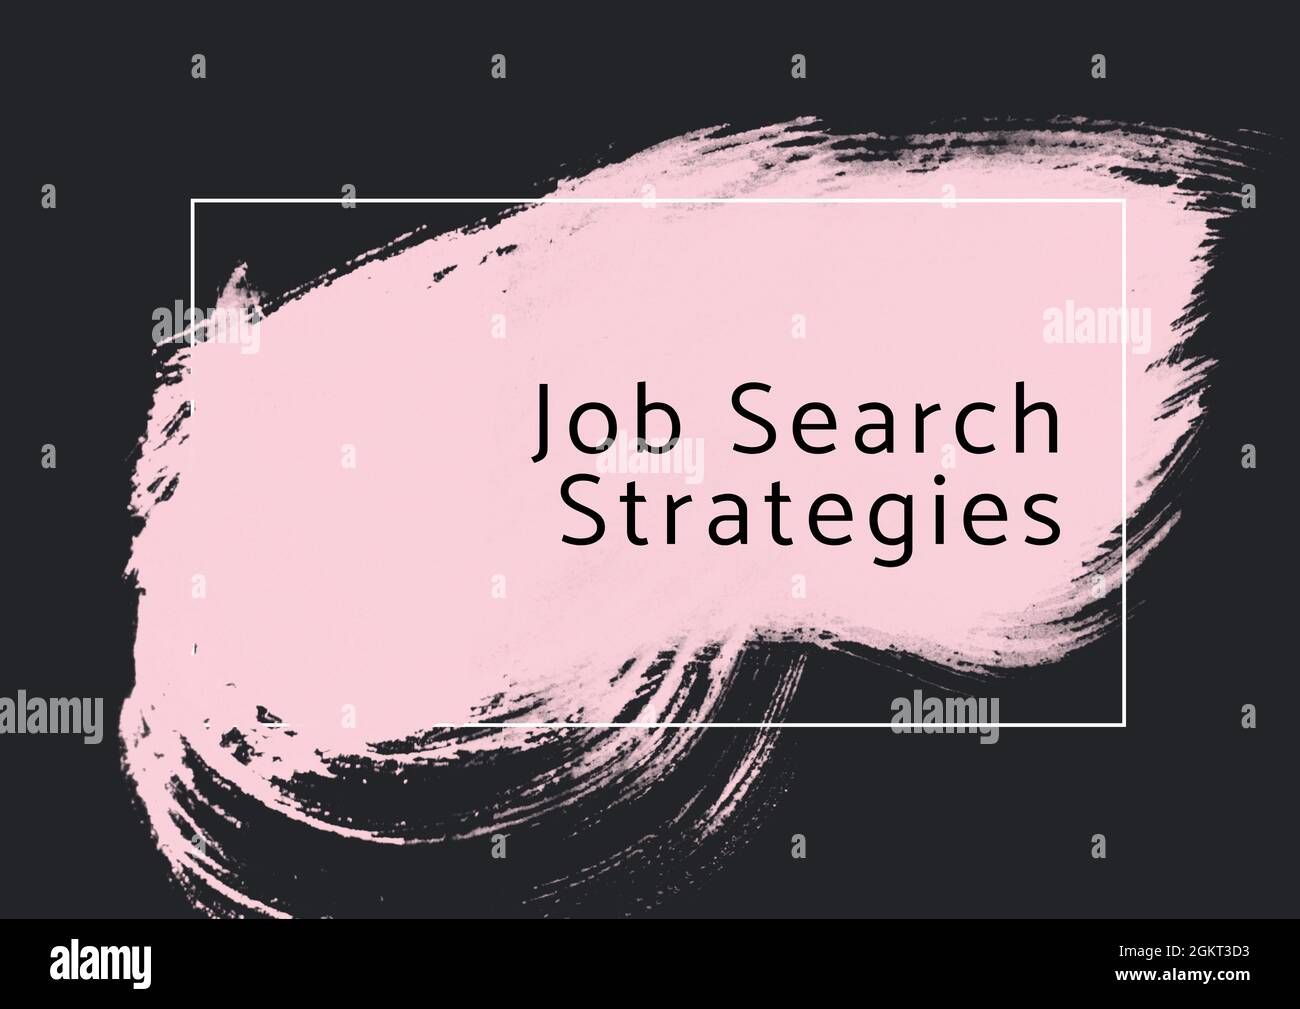 Job search strategies text on pink paint brush stroke against black background Stock Photo